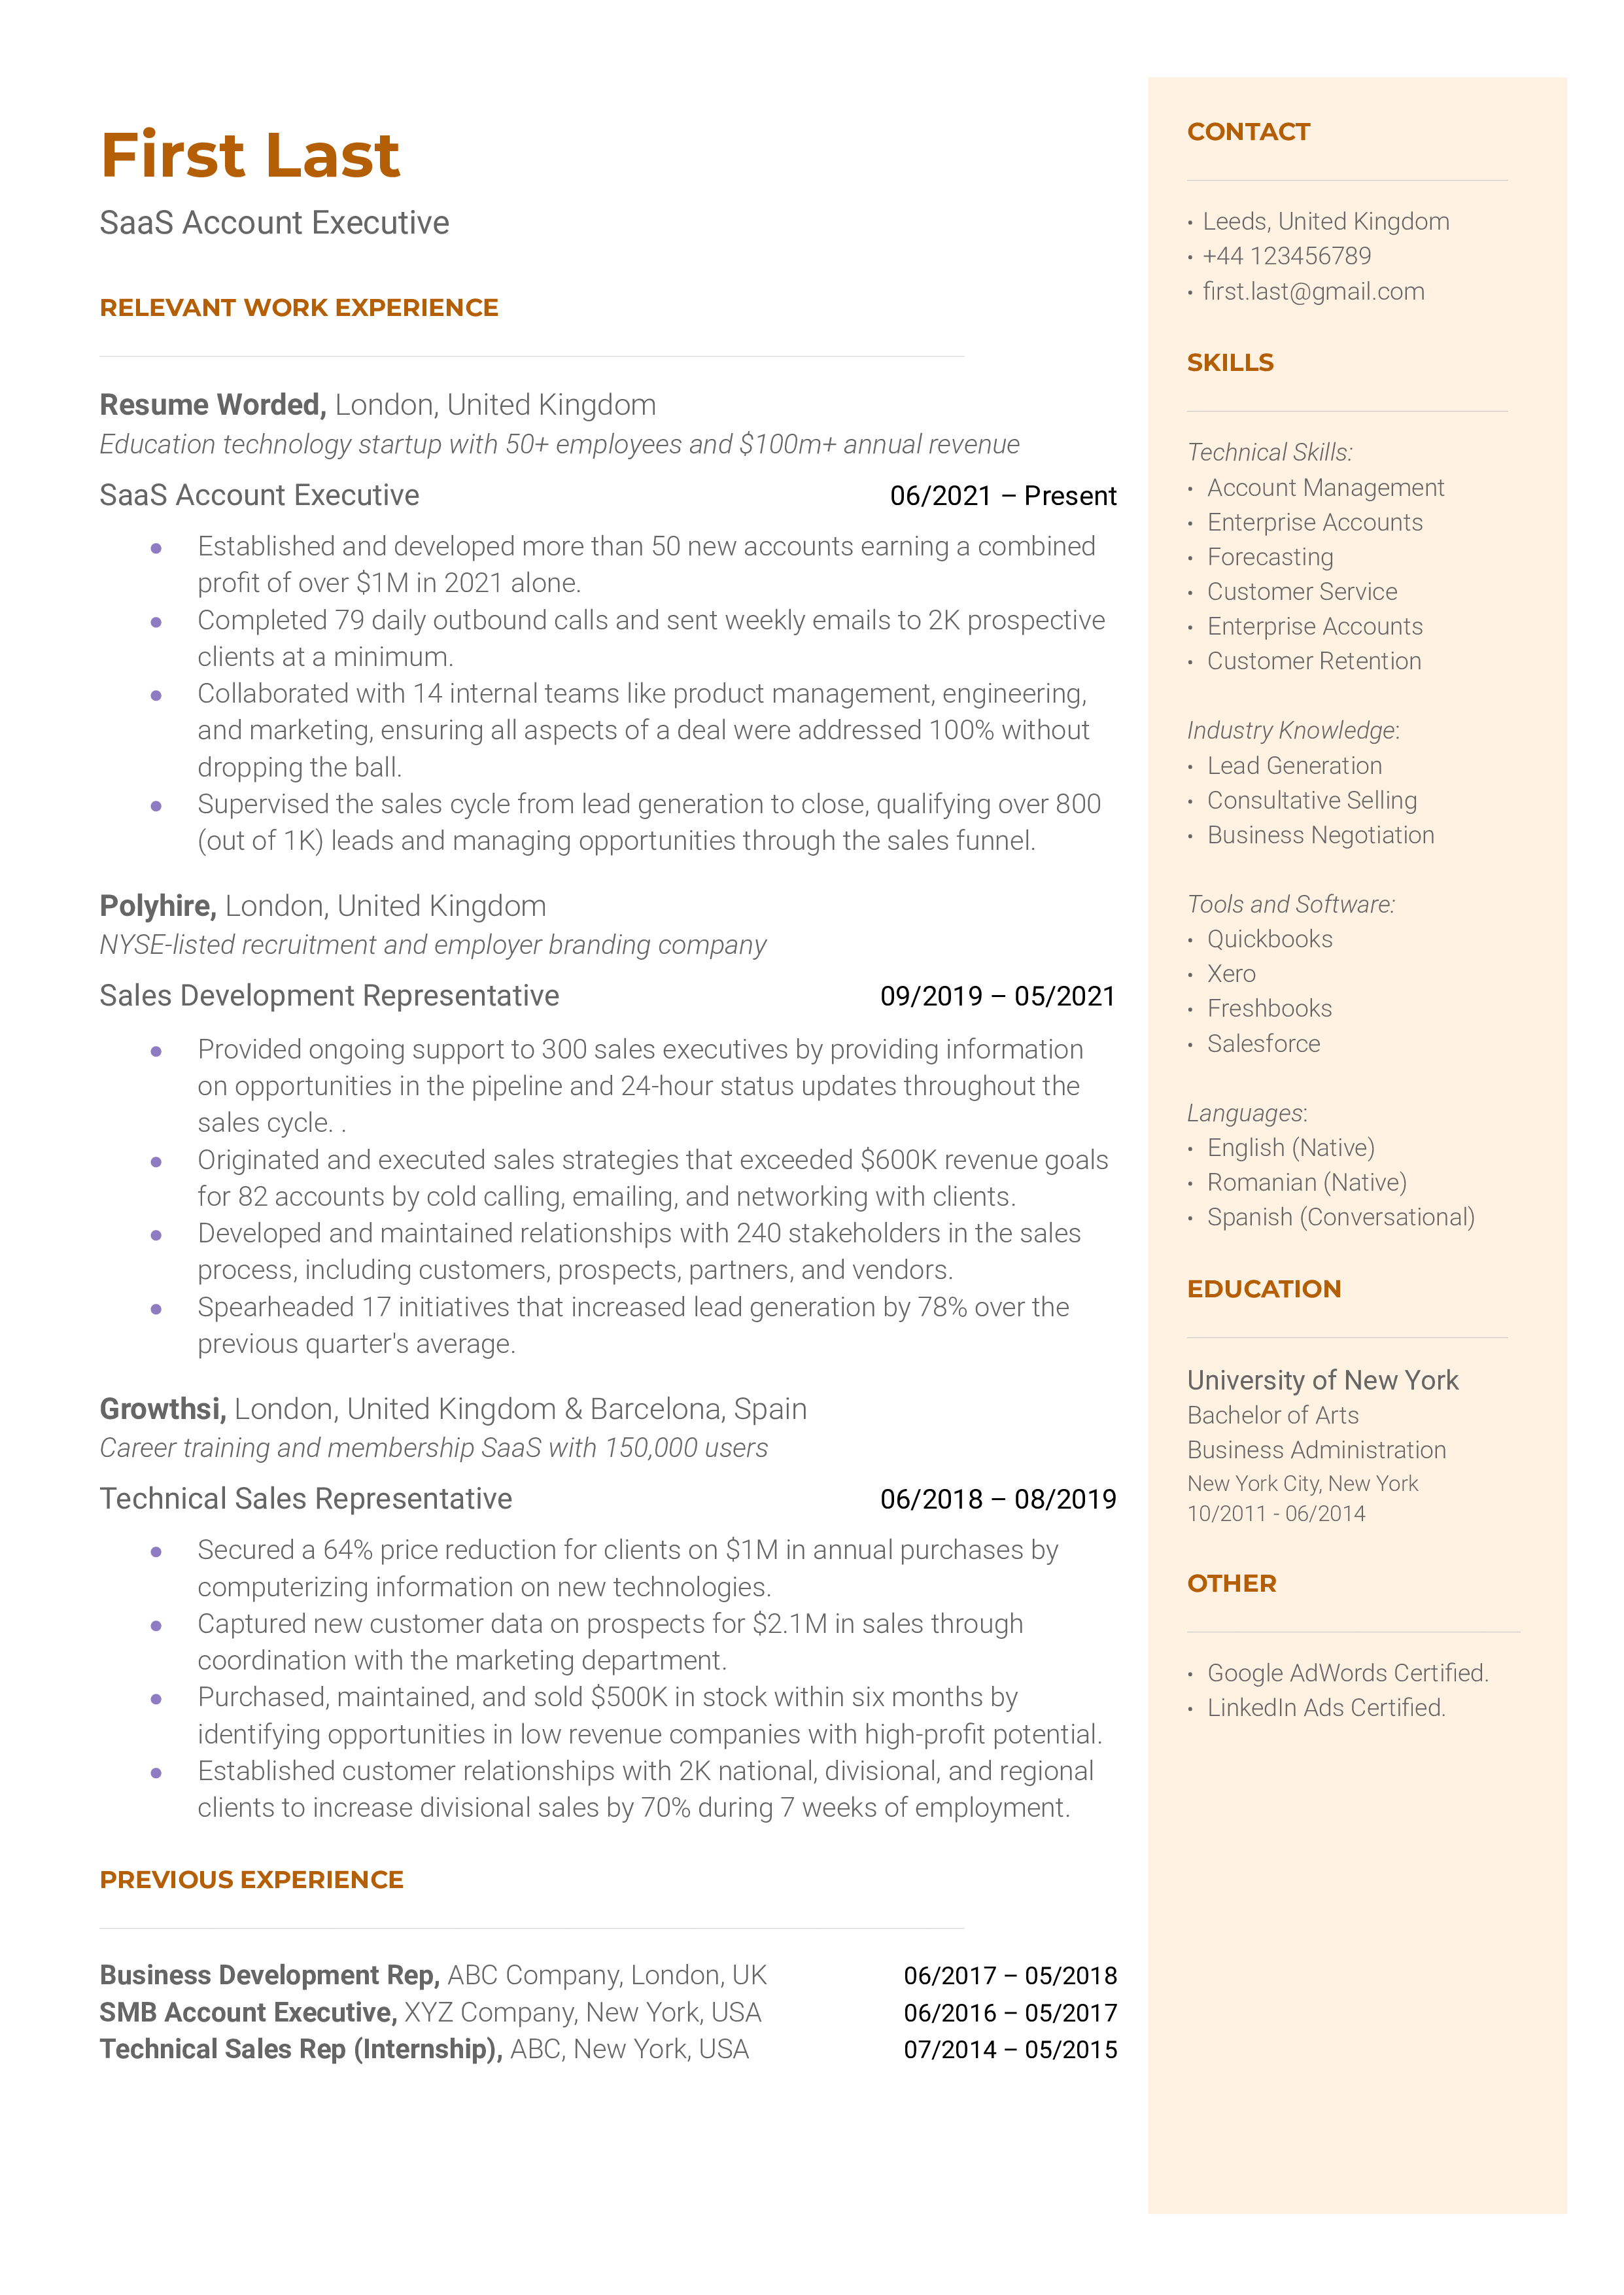 A SaaS account executive resume sample that highlights the applicant’s SaaS experience and quantifiable sales success.